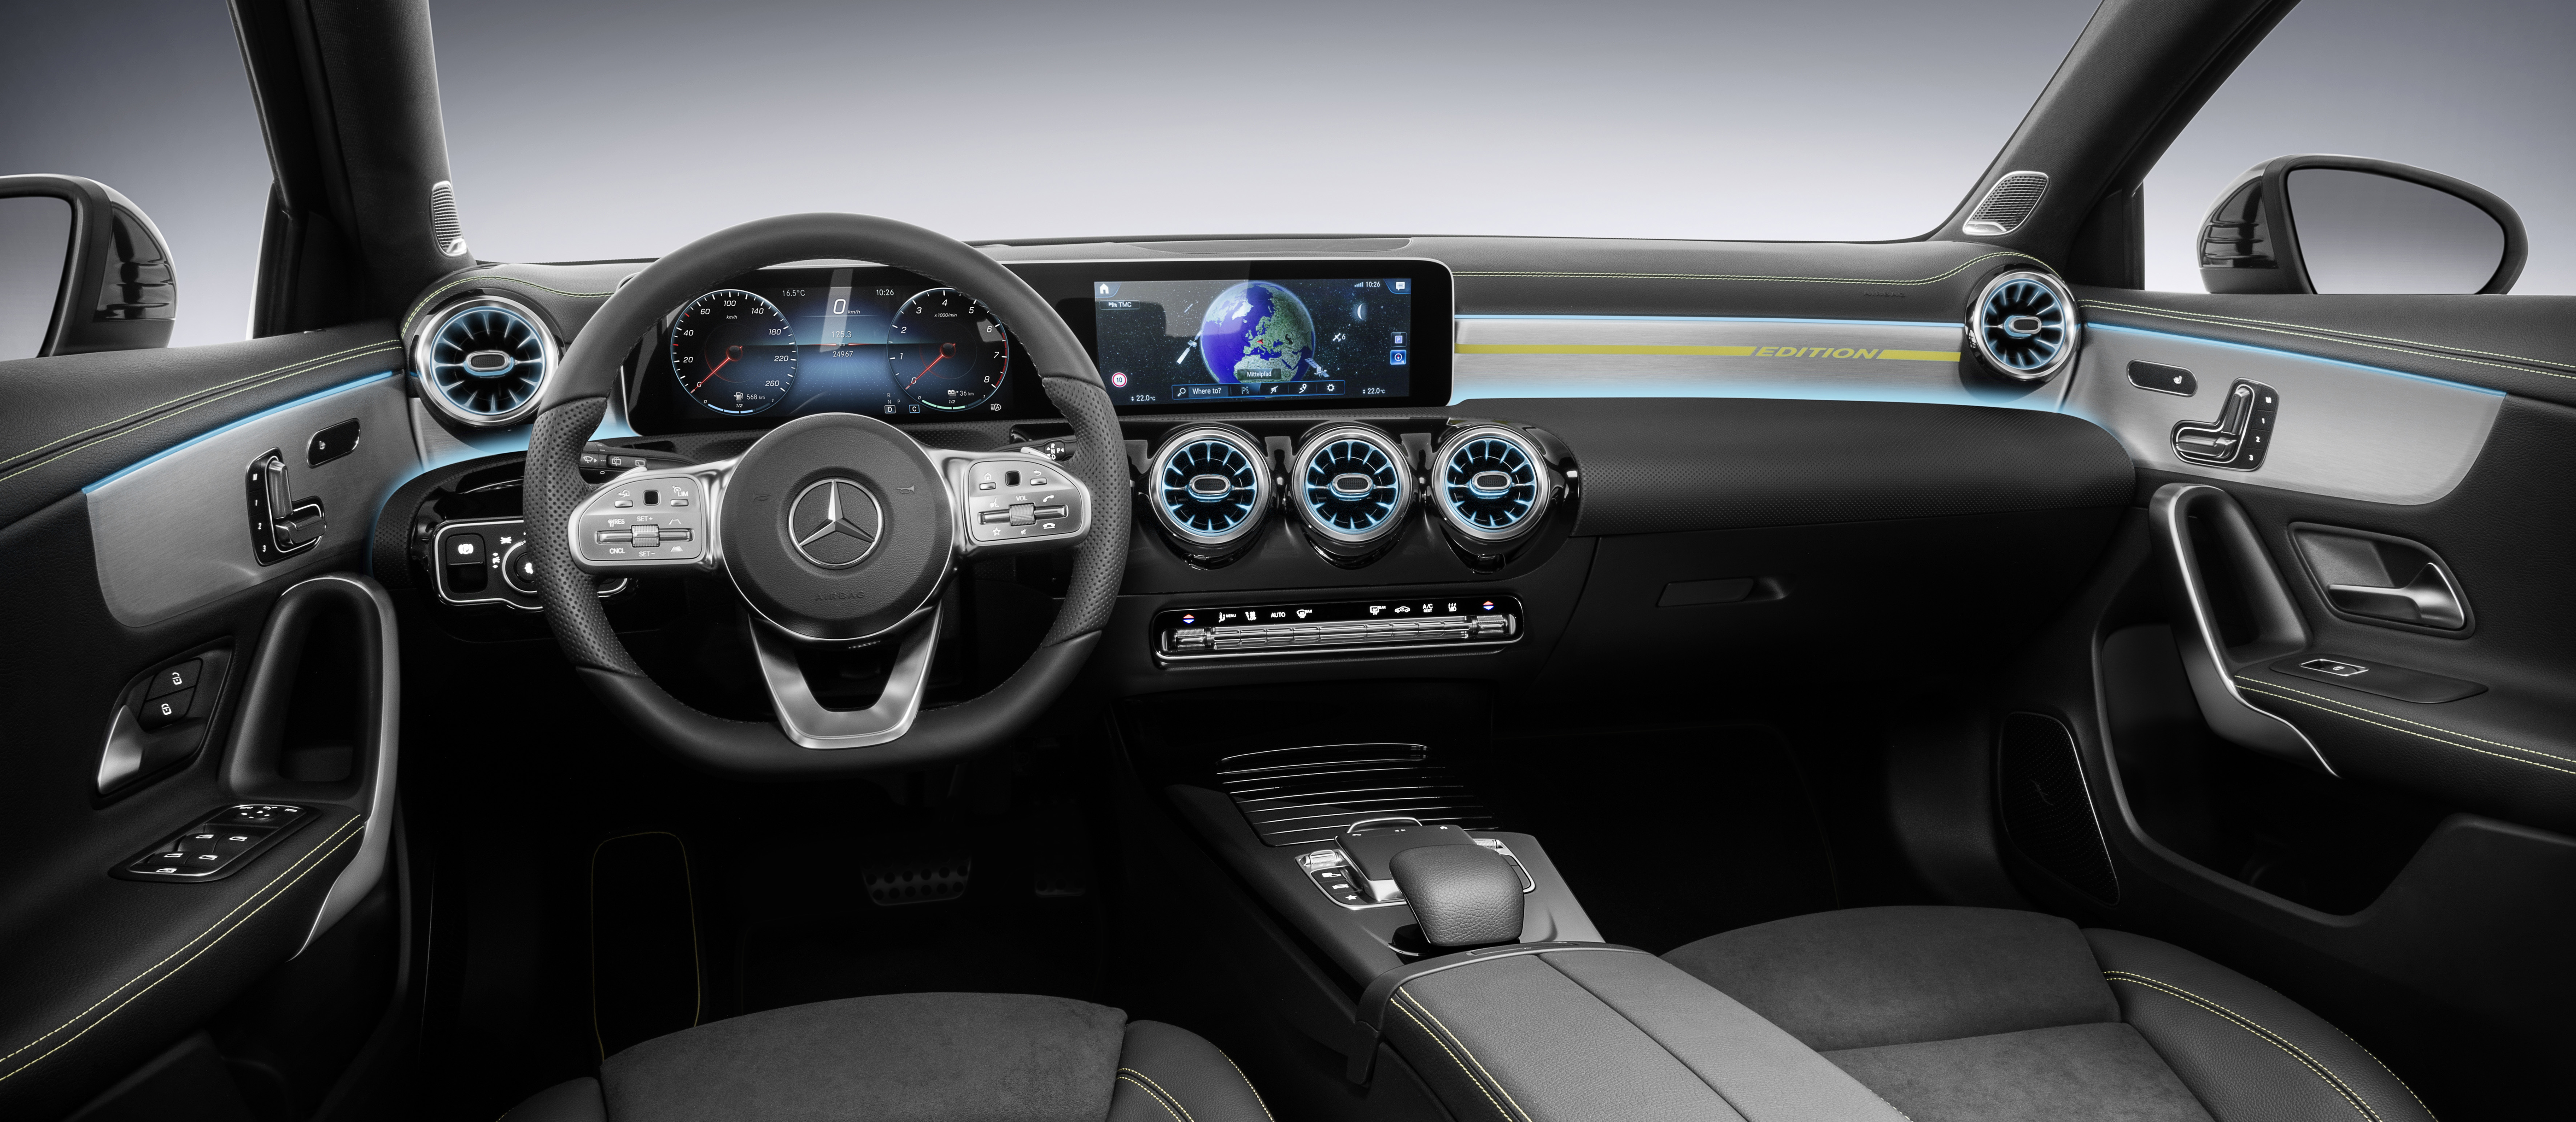 2018 Mercedes Benz A Class Interior Revealed In Full